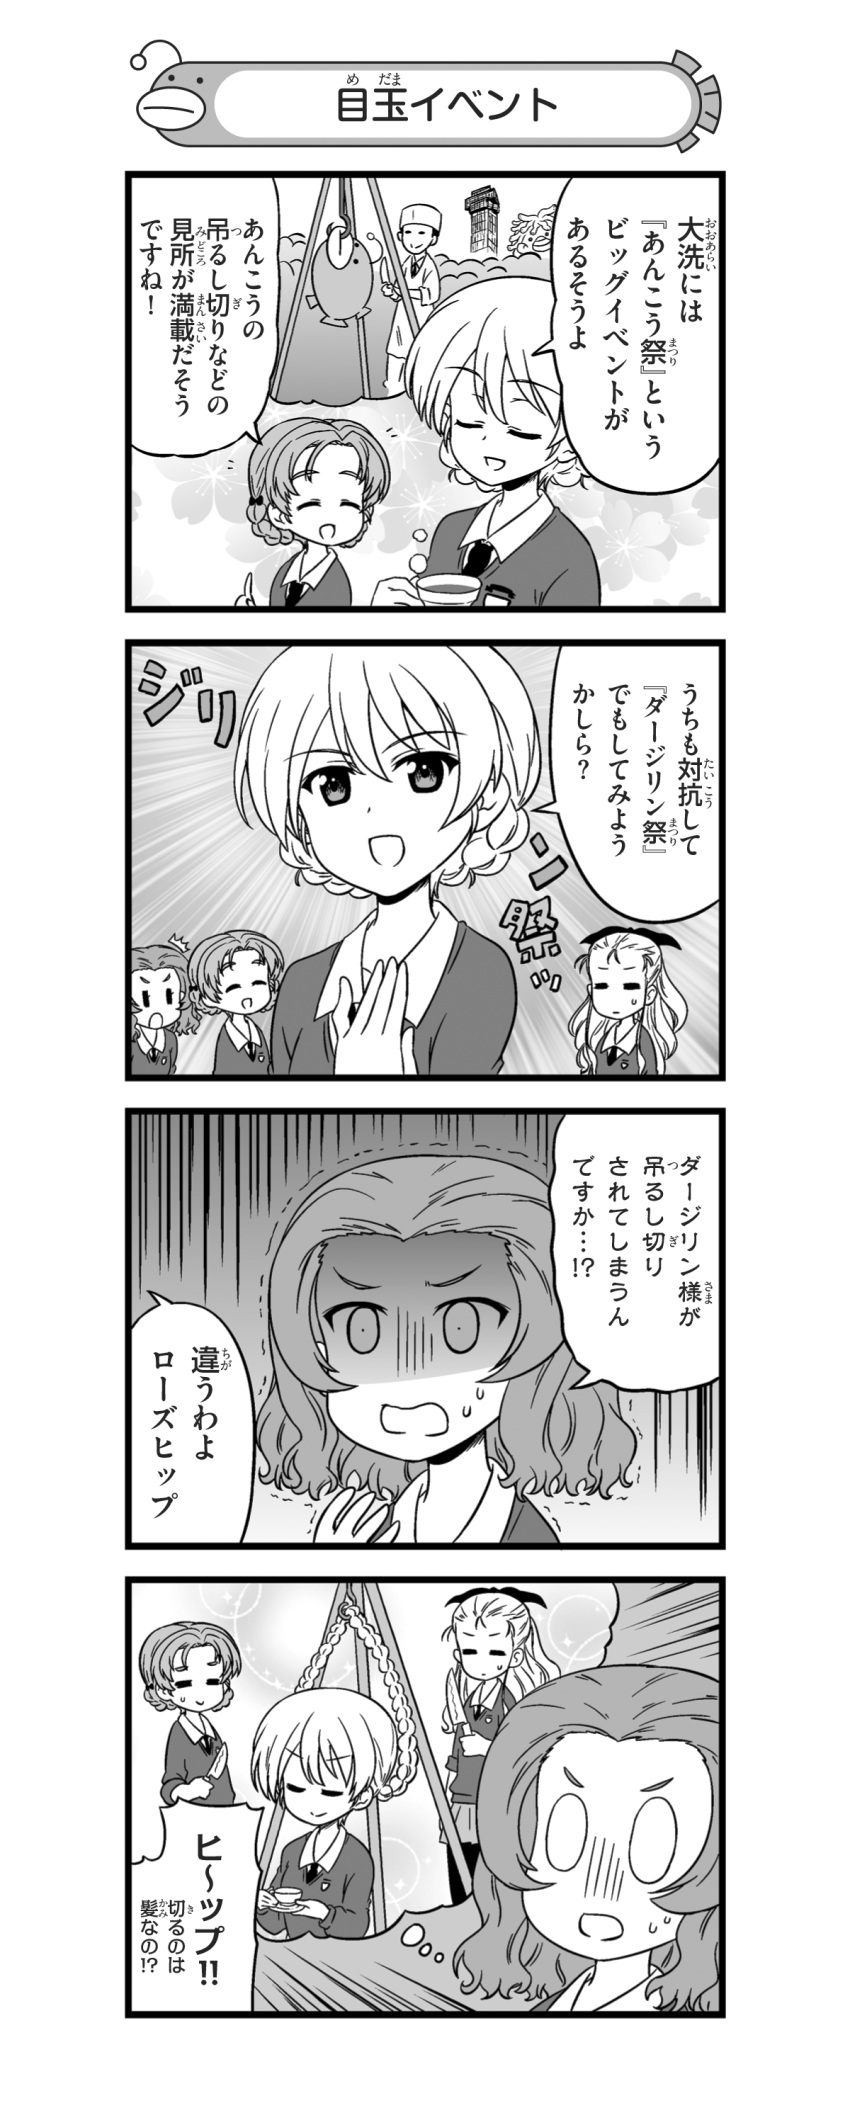 /\/\/\ 0_0 1boy 4girls 4koma :| =_= absurdres anglerfish assam aura bangs bow braid chef chef_hat chef_uniform closed_eyes closed_mouth comic constricted_pupils crowd cup darjeeling dark_aura dress_shirt emblem eyebrows_visible_through_hair fish frown girls_und_panzer gloom_(expression) greyscale hair_bow hair_pulled_back hair_ribbon hair_undone hand_on_own_chest hat highres holding holding_cup holding_knife imagining knife light_rays long_hair long_sleeves looking_at_another mascot miniskirt monochrome multiple_girls nanashiro_gorou necktie notice_lines official_art ooarai_marine_tower open_mouth orange_pekoe pantyhose parted_bangs pdf_available pleated_skirt pointing pointing_up ribbon rosehip school_uniform shirt short_hair skirt sleeves_rolled_up smile st._gloriana's_school_uniform standing steam sweatdrop sweater teacup thought_bubble tied_hair translation_request trembling twin_braids v-neck wing_collar